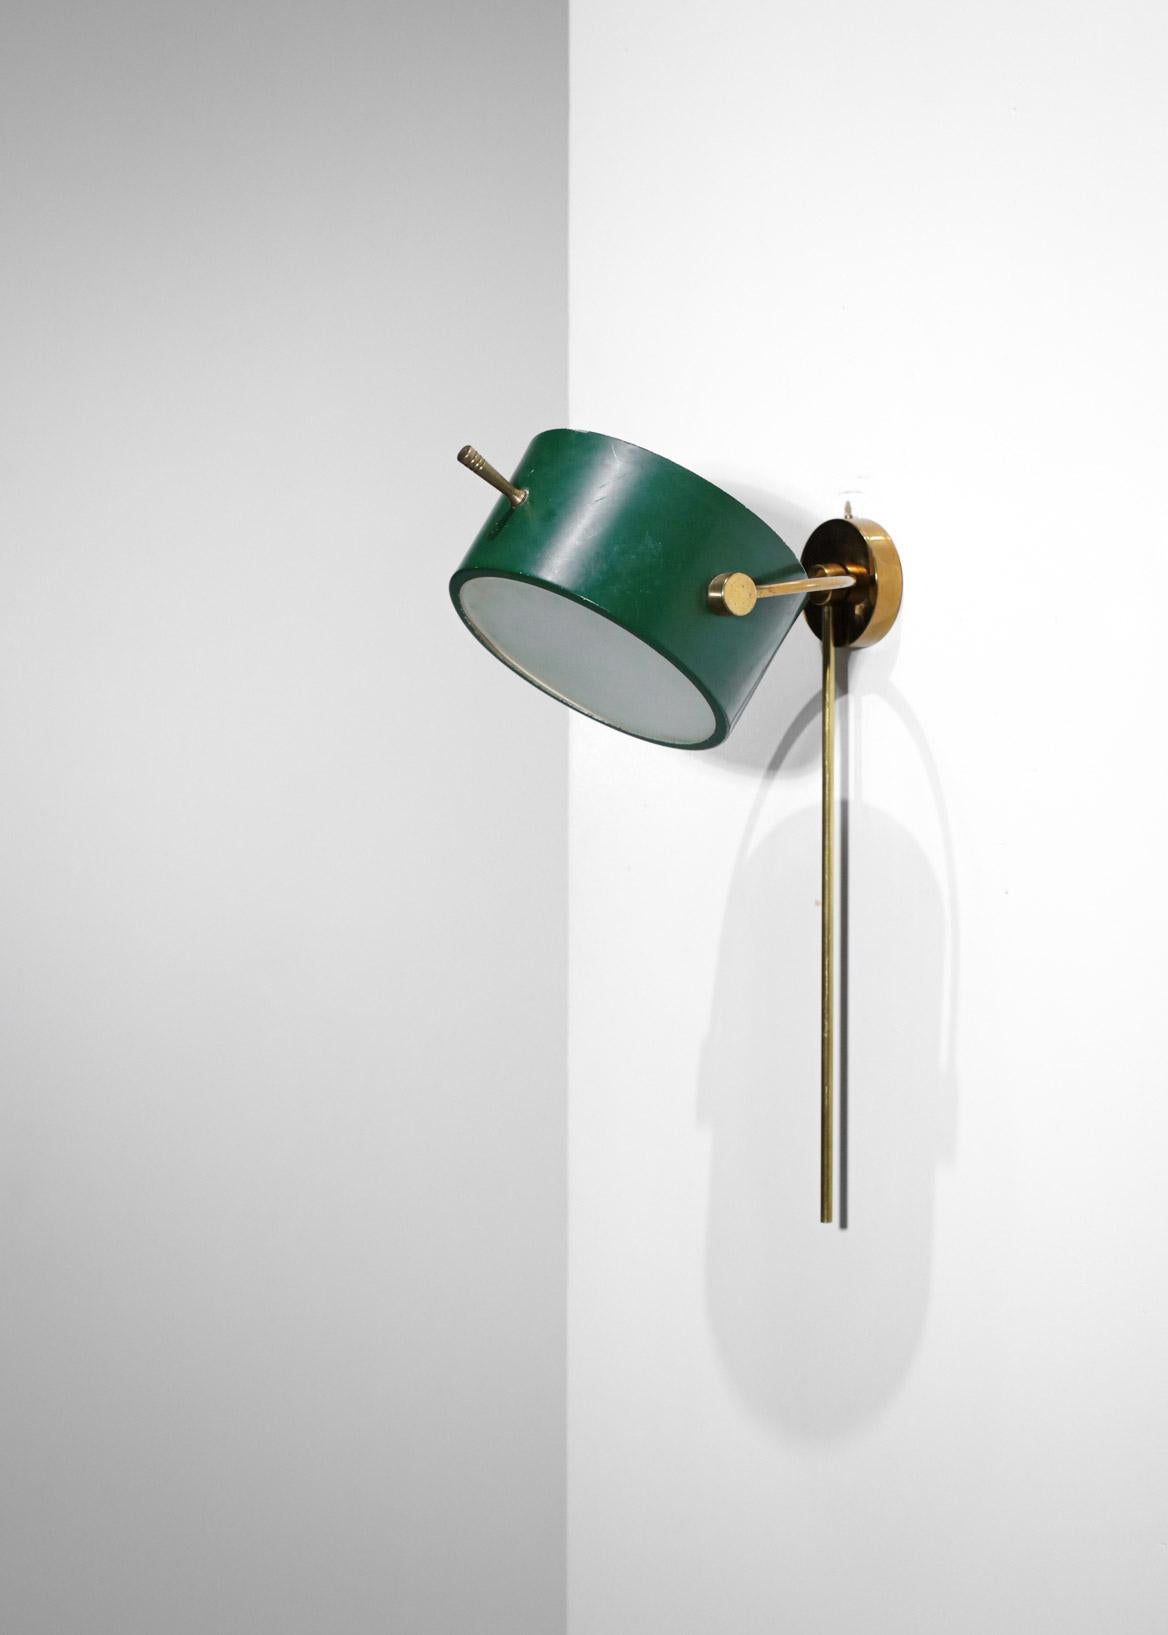 Rare 50's French Wall Lamp by Lunel Dark Green in Style of Mathieu Mategot, F420 7